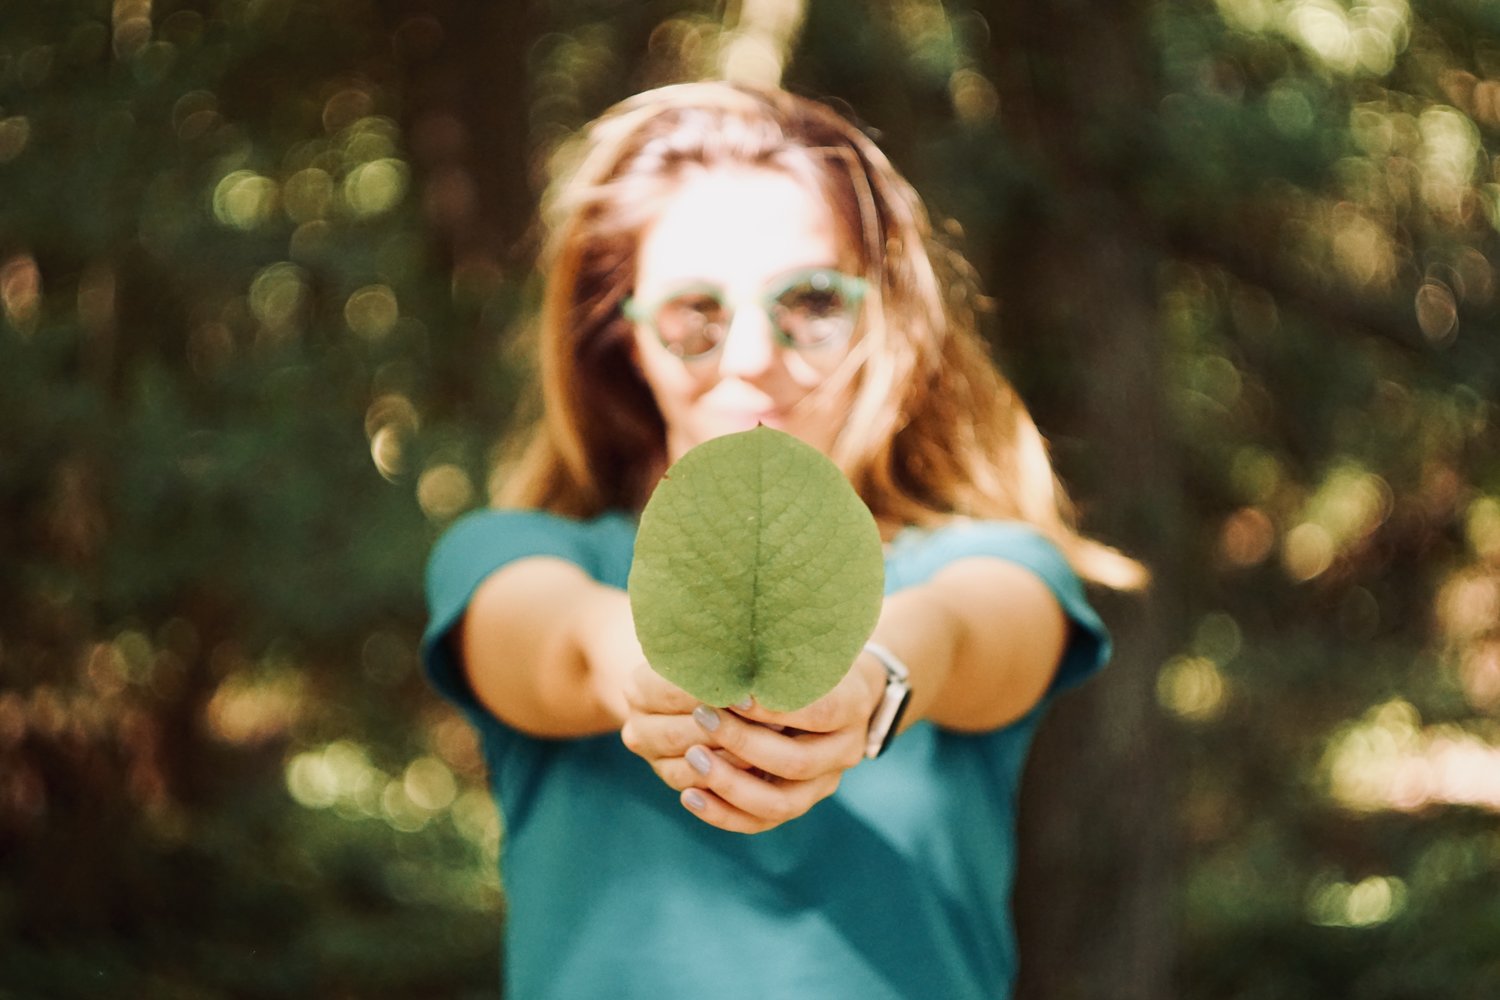 4 Easy Ways to Live a Healthier & More Eco-Friendly Lifestyle